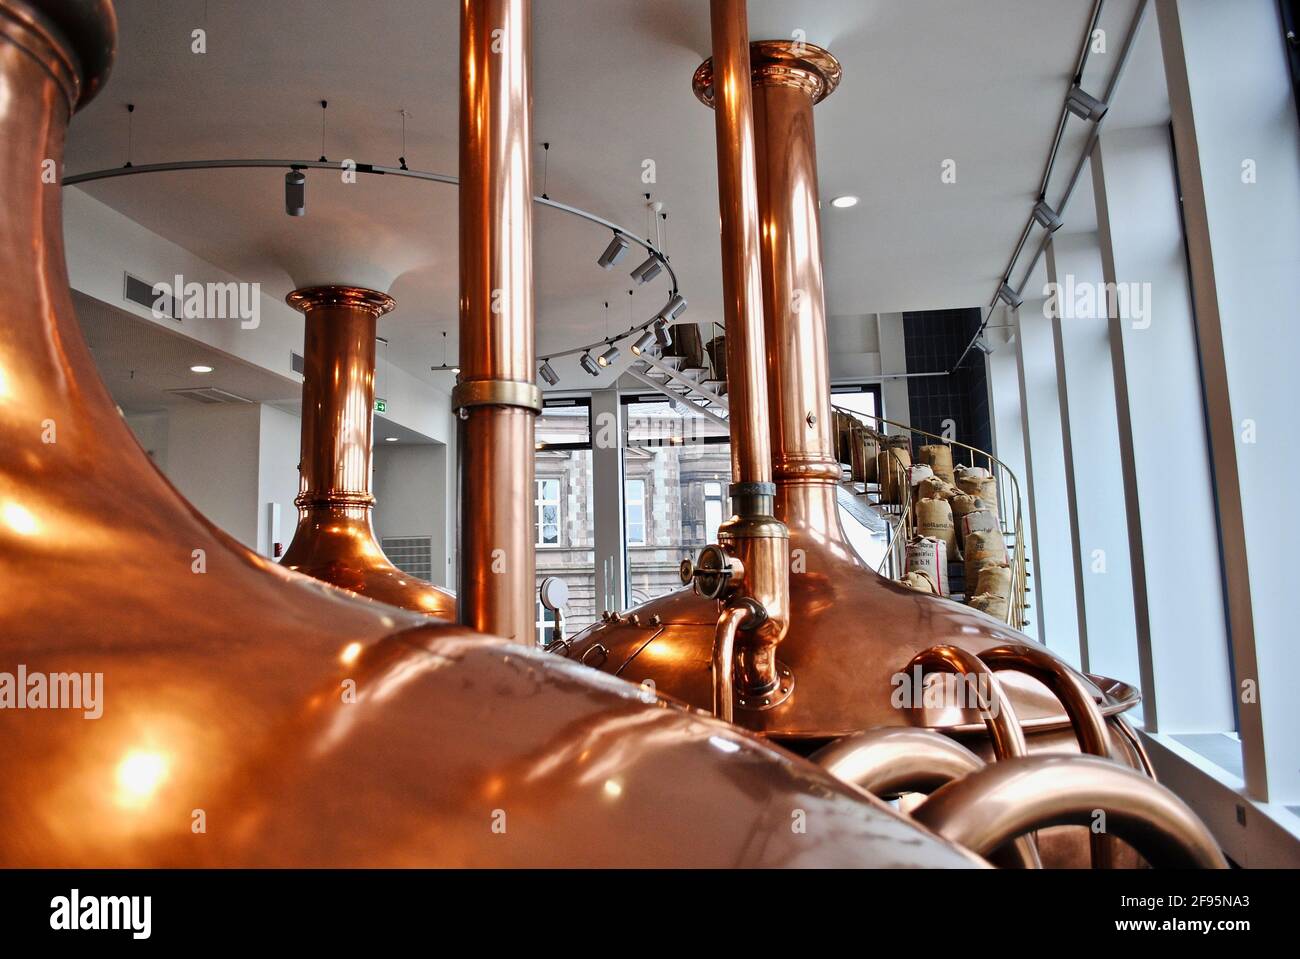 Bitburg, Germany: Bitburger Brewery (Bitburger Brauerei) is a large German brewery. Copper brew kettle and spiral stairs with burlap bags of malt. Stock Photo